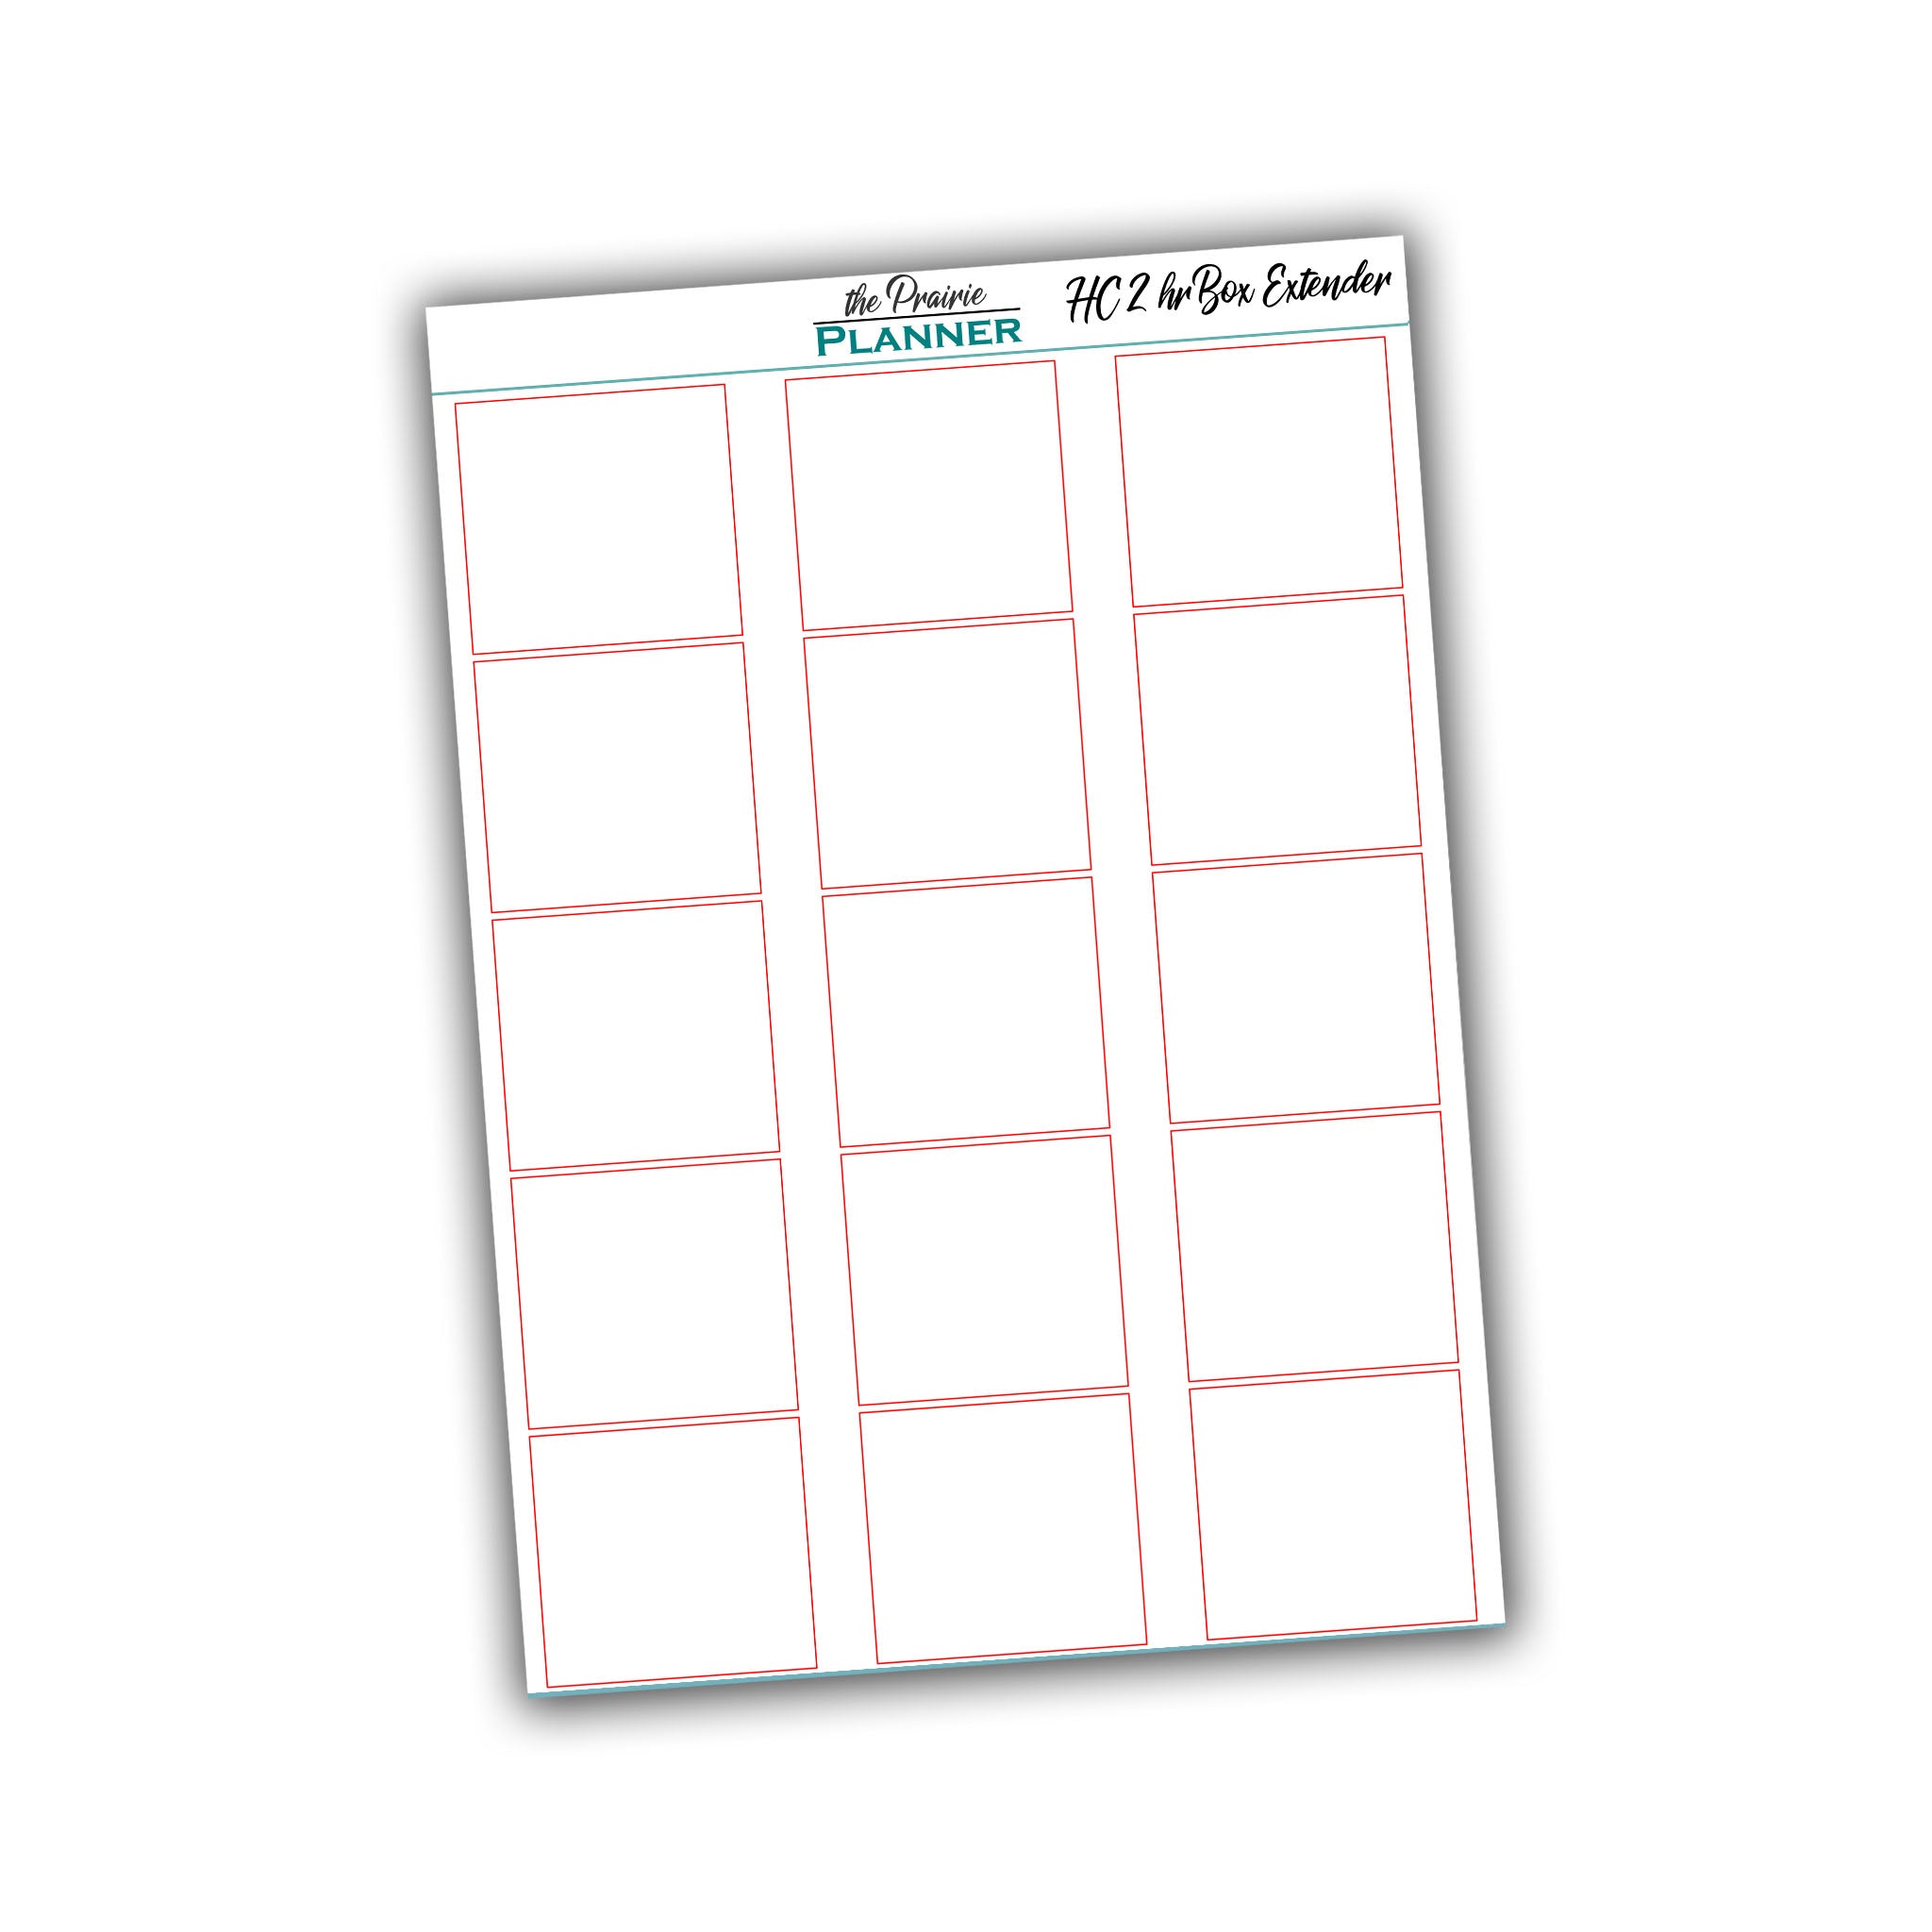 HC 2 Hour Box Extenders - Planner Stickers